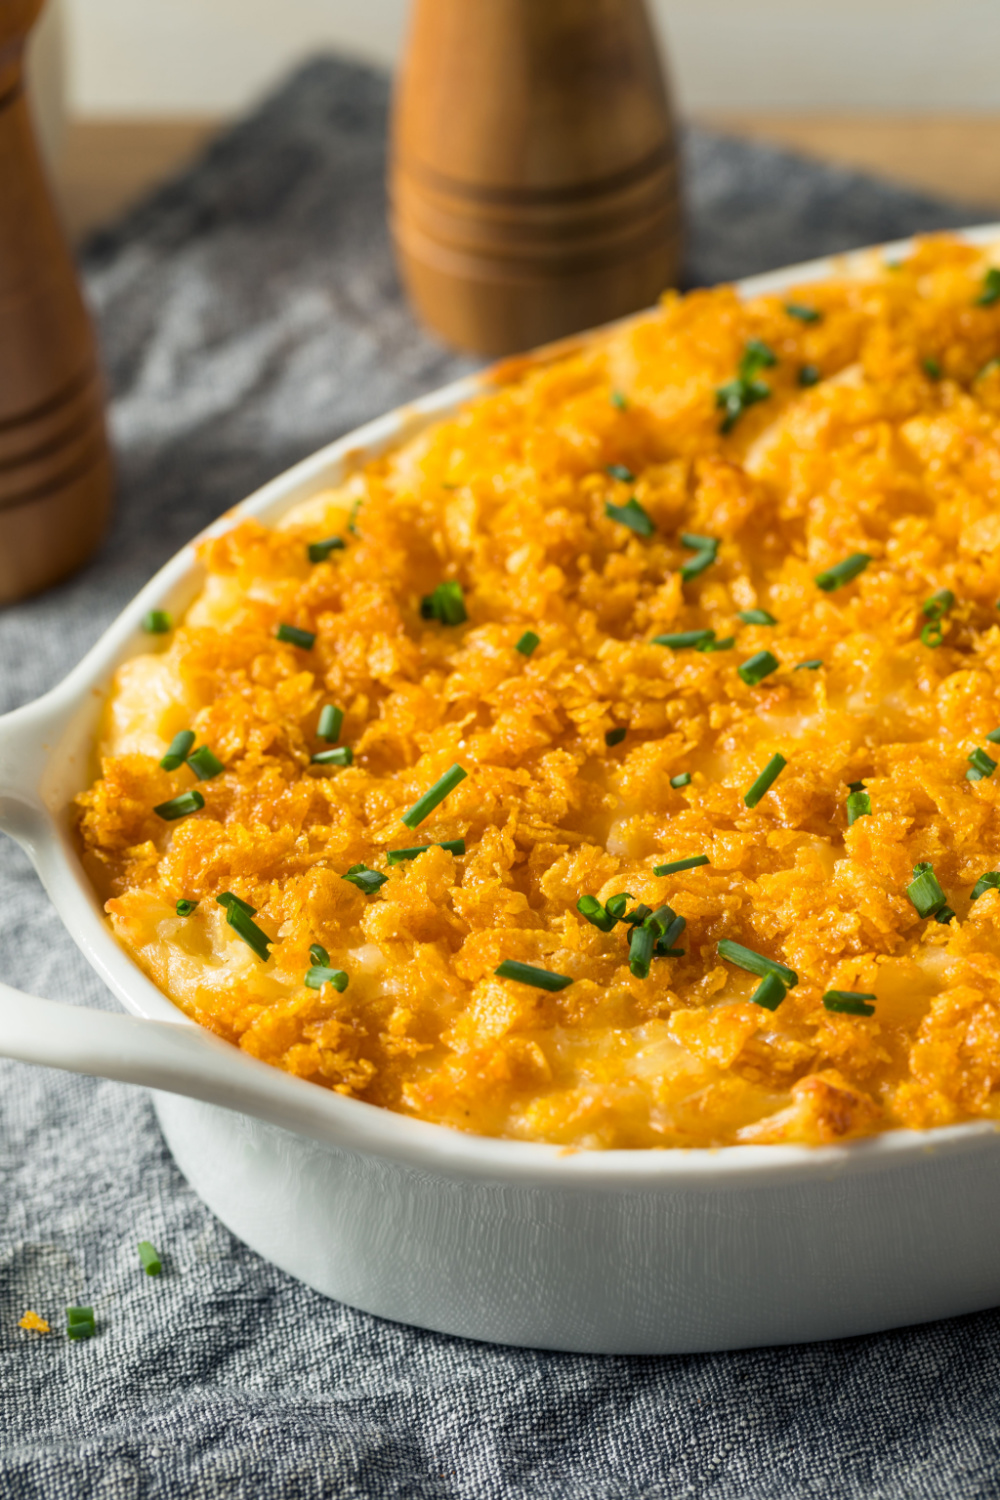 Cheesy potato casserole topped with golden brown crushed cornflakes and garnished with chopped green onions.